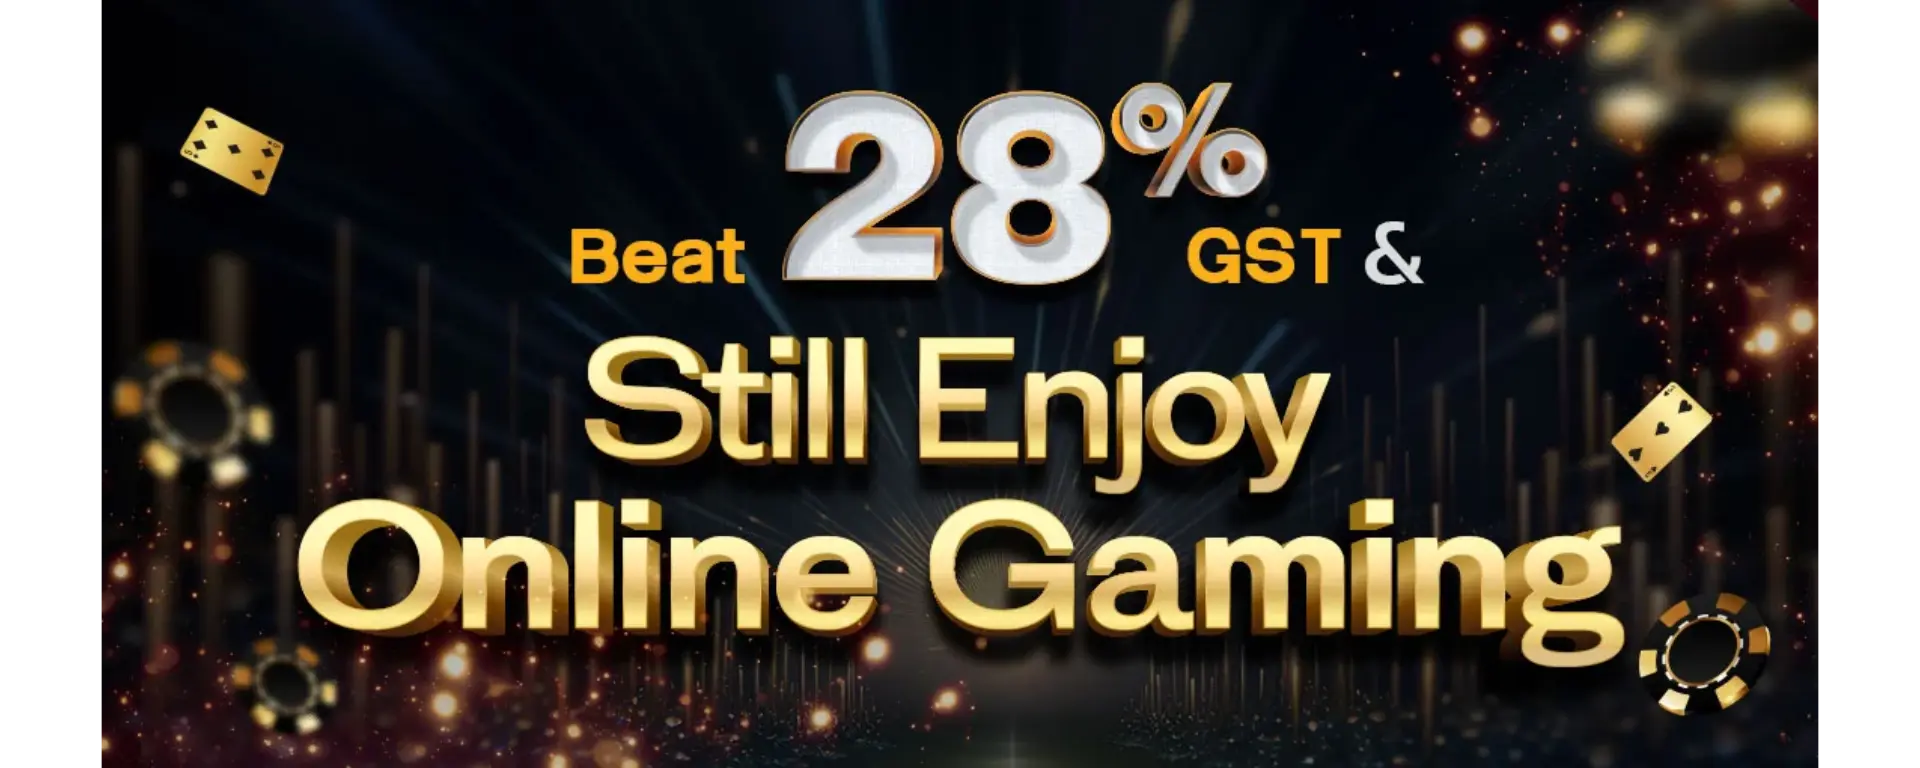 28 Percent GST on Online Gaming